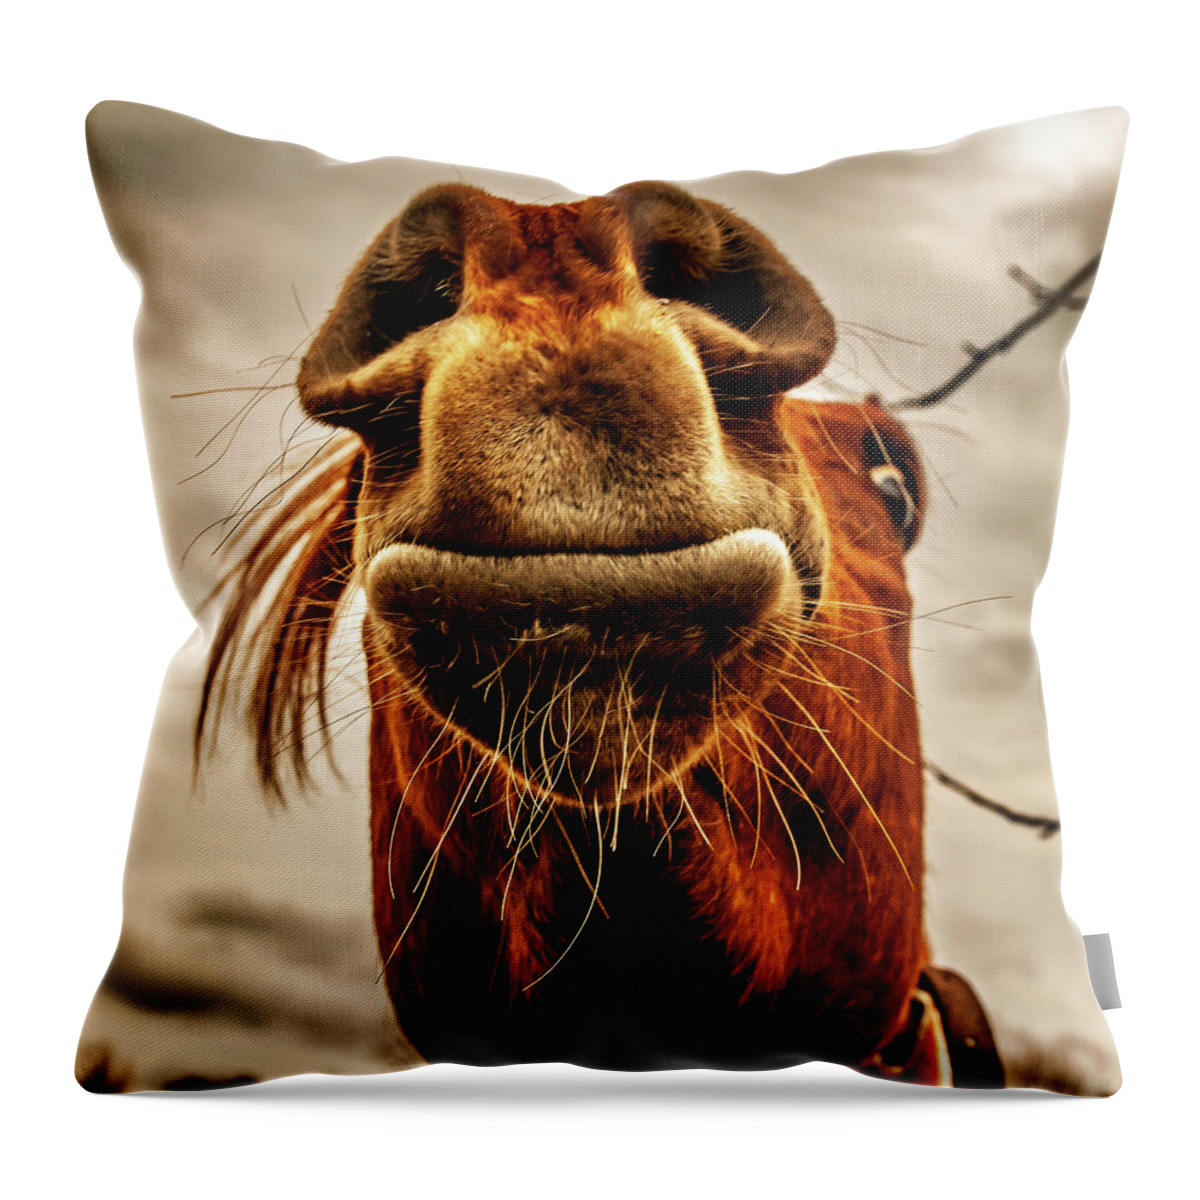 Horses New Jersey Medford Throw Pillow featuring the photograph Horse Head Mr. Ed by Louis Dallara